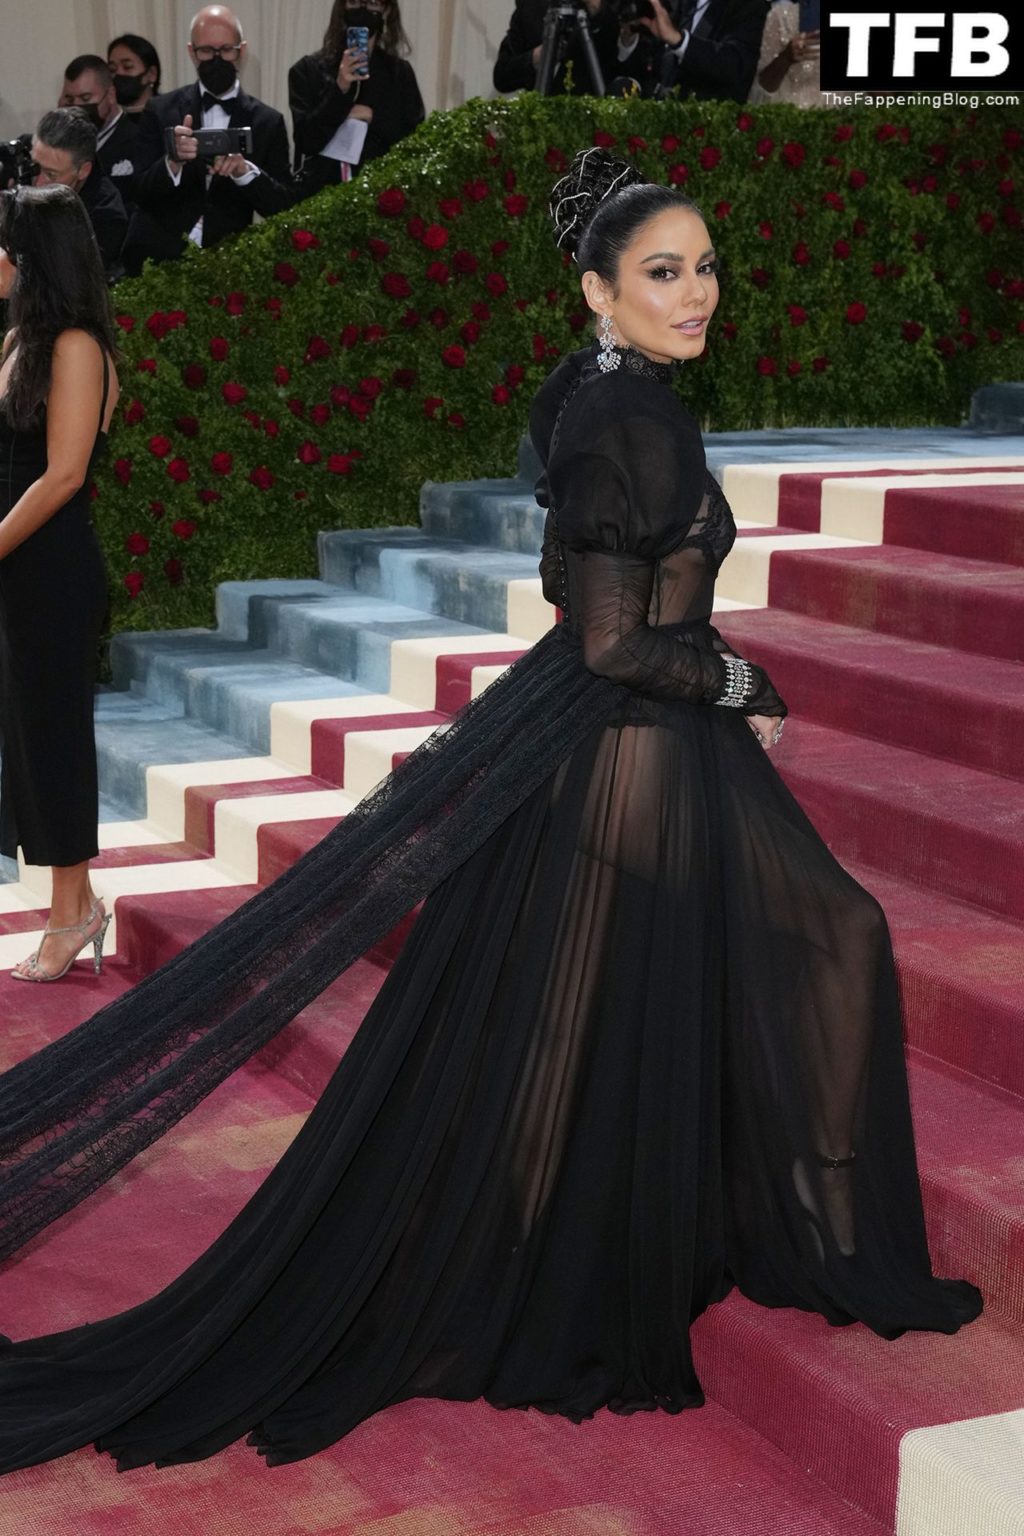 Vanessa Hudgens Sexy The Fappening Blog 16 1 1024x1536 - Vanessa Hudgens Looks Stunning in a See-Through Dress at The 2022 Met Gala in NYC (99 Photos)